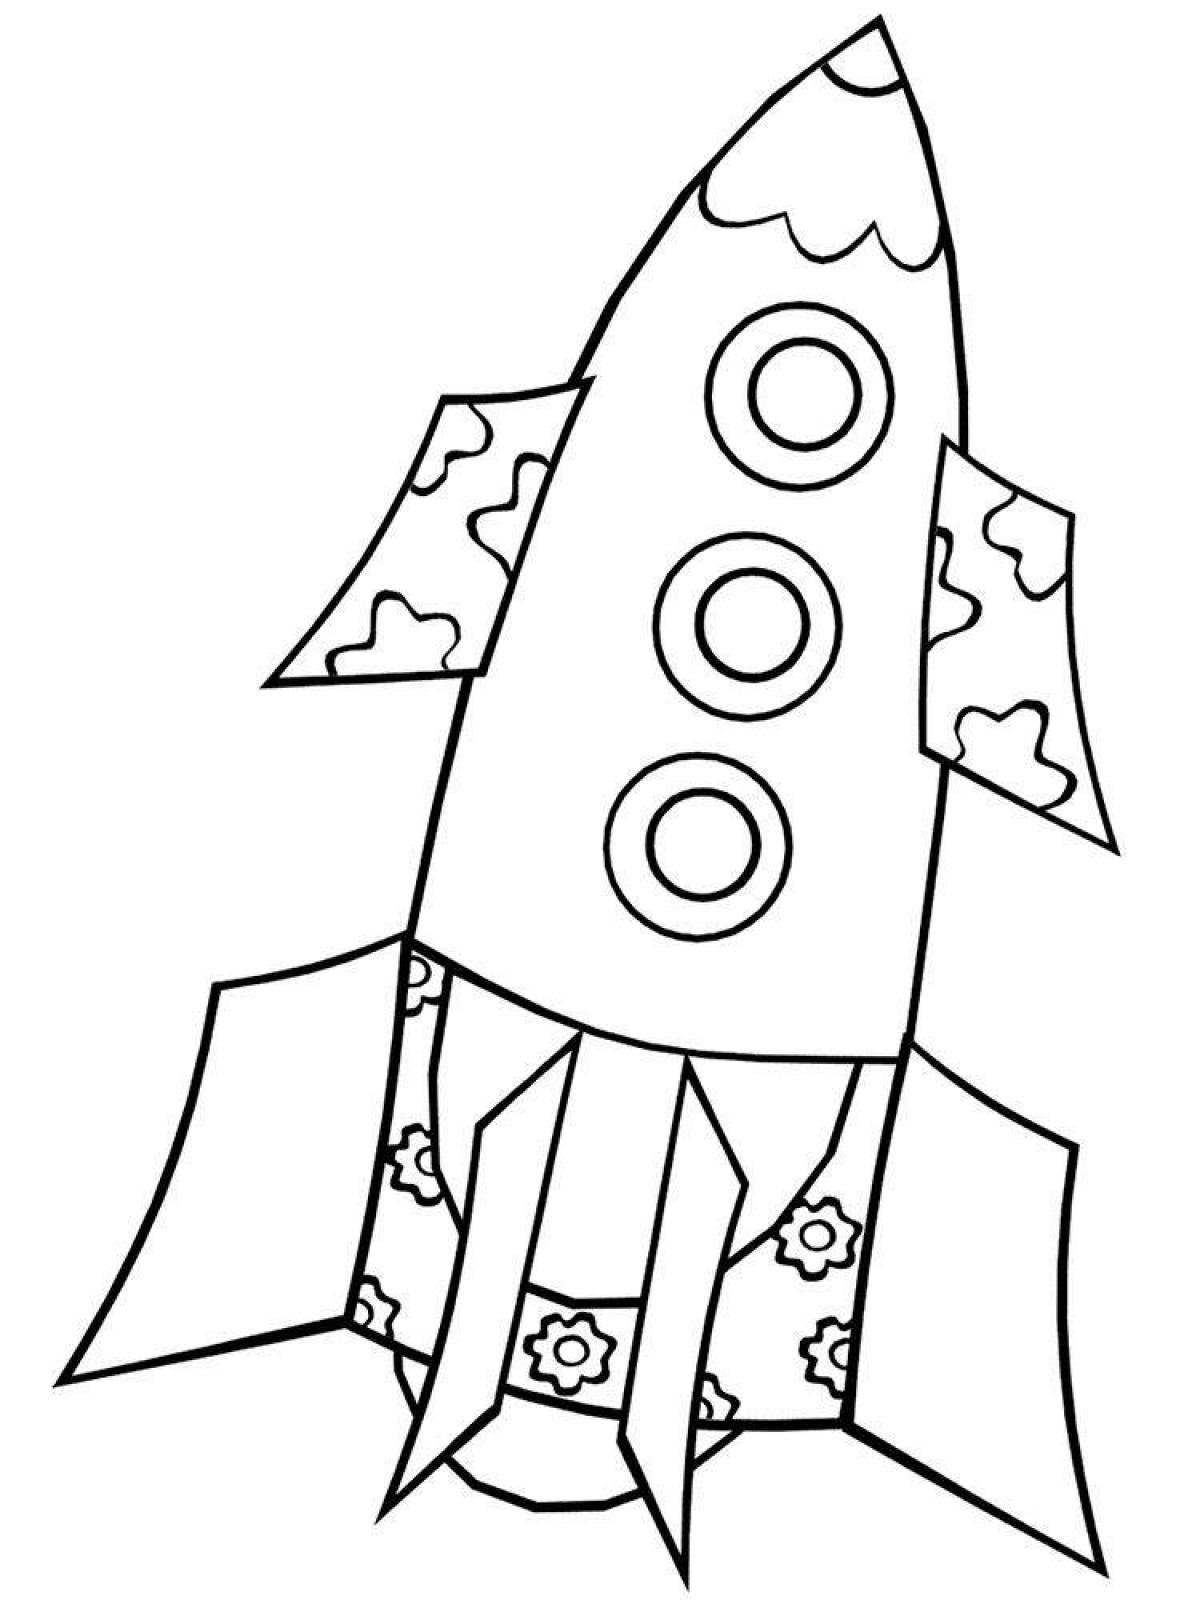 Rocket coloring book for kids 6-7 years old